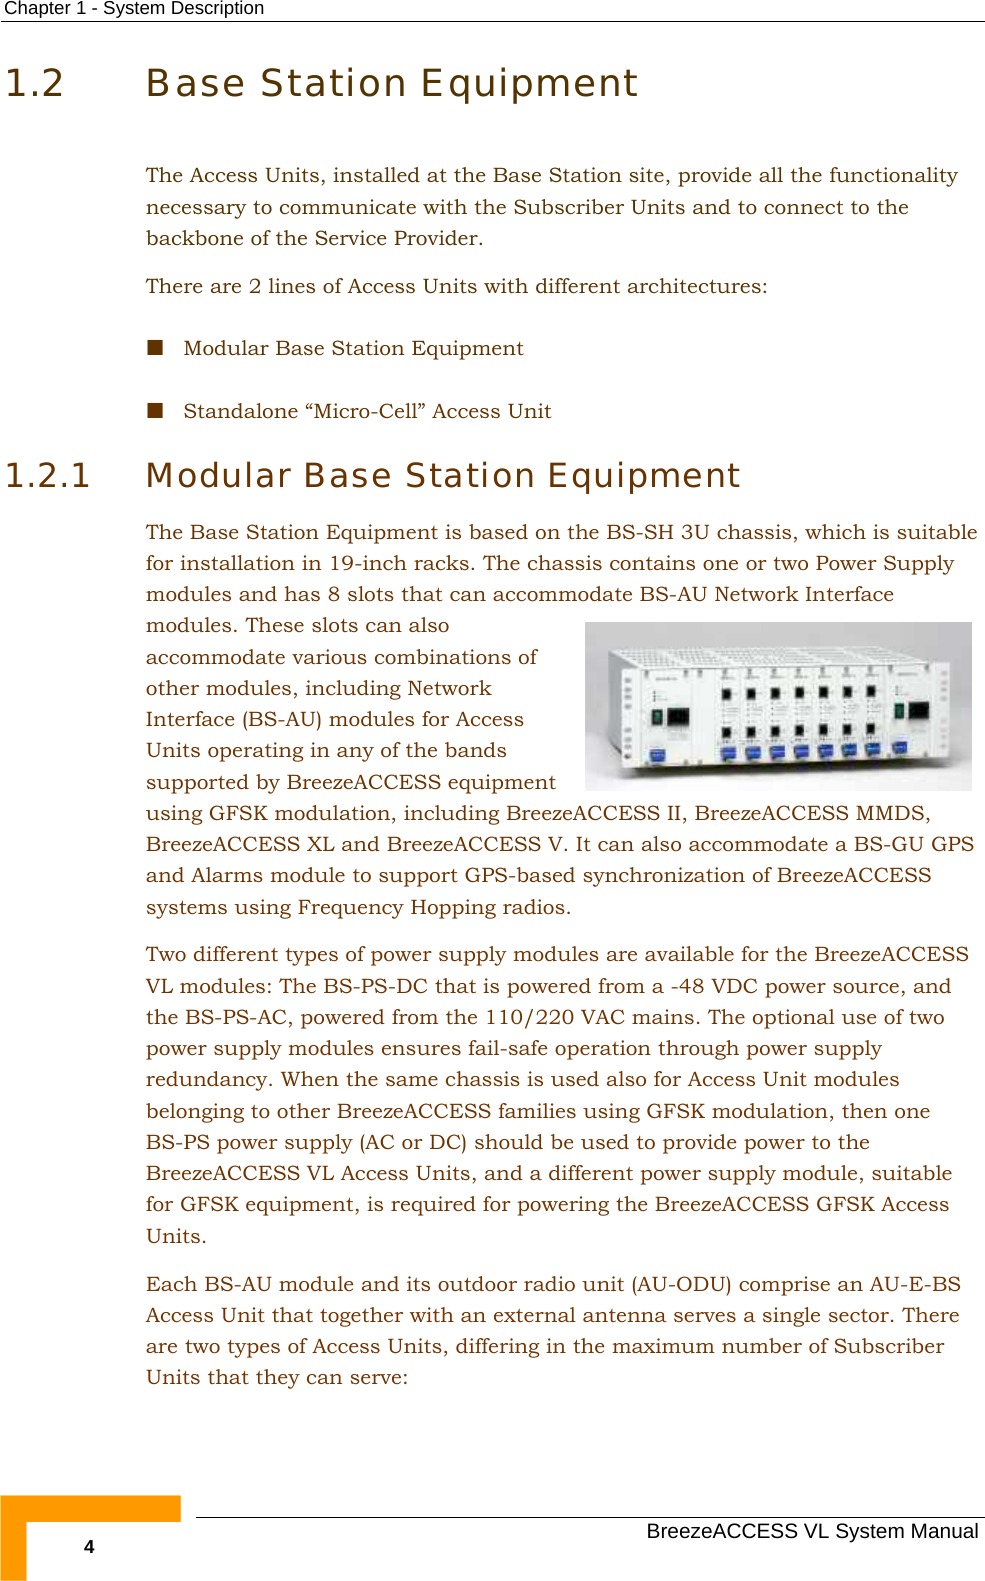 Chapter  1 - System Description   BreezeACCESS VL System Manual 4 1.2 Base Station Equipment The Access Units, installed at the Base Station site, provide all the functionality necessary to communicate with the Subscriber Units and to connect to the backbone of the Service Provider. There are 2 lines of Access Units with different architectures:  Modular Base Station Equipment  Standalone “Micro-Cell” Access Unit 1.2.1 Modular Base Station Equipment The Base Station Equipment is based on the BS-SH 3U chassis, which is suitable for installation in 19-inch racks. The chassis contains one or two Power Supply modules and has 8 slots that can accommodate BS-AU Network Interface modules. These slots can also accommodate various combinations of other modules, including Network Interface (BS-AU) modules for Access Units operating in any of the bands supported by BreezeACCESS equipment using GFSK modulation, including BreezeACCESS II, BreezeACCESS MMDS, BreezeACCESS XL and BreezeACCESS V. It can also accommodate a BS-GU GPS and Alarms module to support GPS-based synchronization of BreezeACCESS systems using Frequency Hopping radios.  Two different types of power supply modules are available for the BreezeACCESS VL modules: The BS-PS-DC that is powered from a -48 VDC power source, and the BS-PS-AC, powered from the 110/220 VAC mains. The optional use of two power supply modules ensures fail-safe operation through power supply redundancy. When the same chassis is used also for Access Unit modules belonging to other BreezeACCESS families using GFSK modulation, then one BS-PS power supply (AC or DC) should be used to provide power to the BreezeACCESS VL Access Units, and a different power supply module, suitable for GFSK equipment, is required for powering the BreezeACCESS GFSK Access Units.  Each BS-AU module and its outdoor radio unit (AU-ODU) comprise an AU-E-BS Access Unit that together with an external antenna serves a single sector. There are two types of Access Units, differing in the maximum number of Subscriber Units that they can serve: 